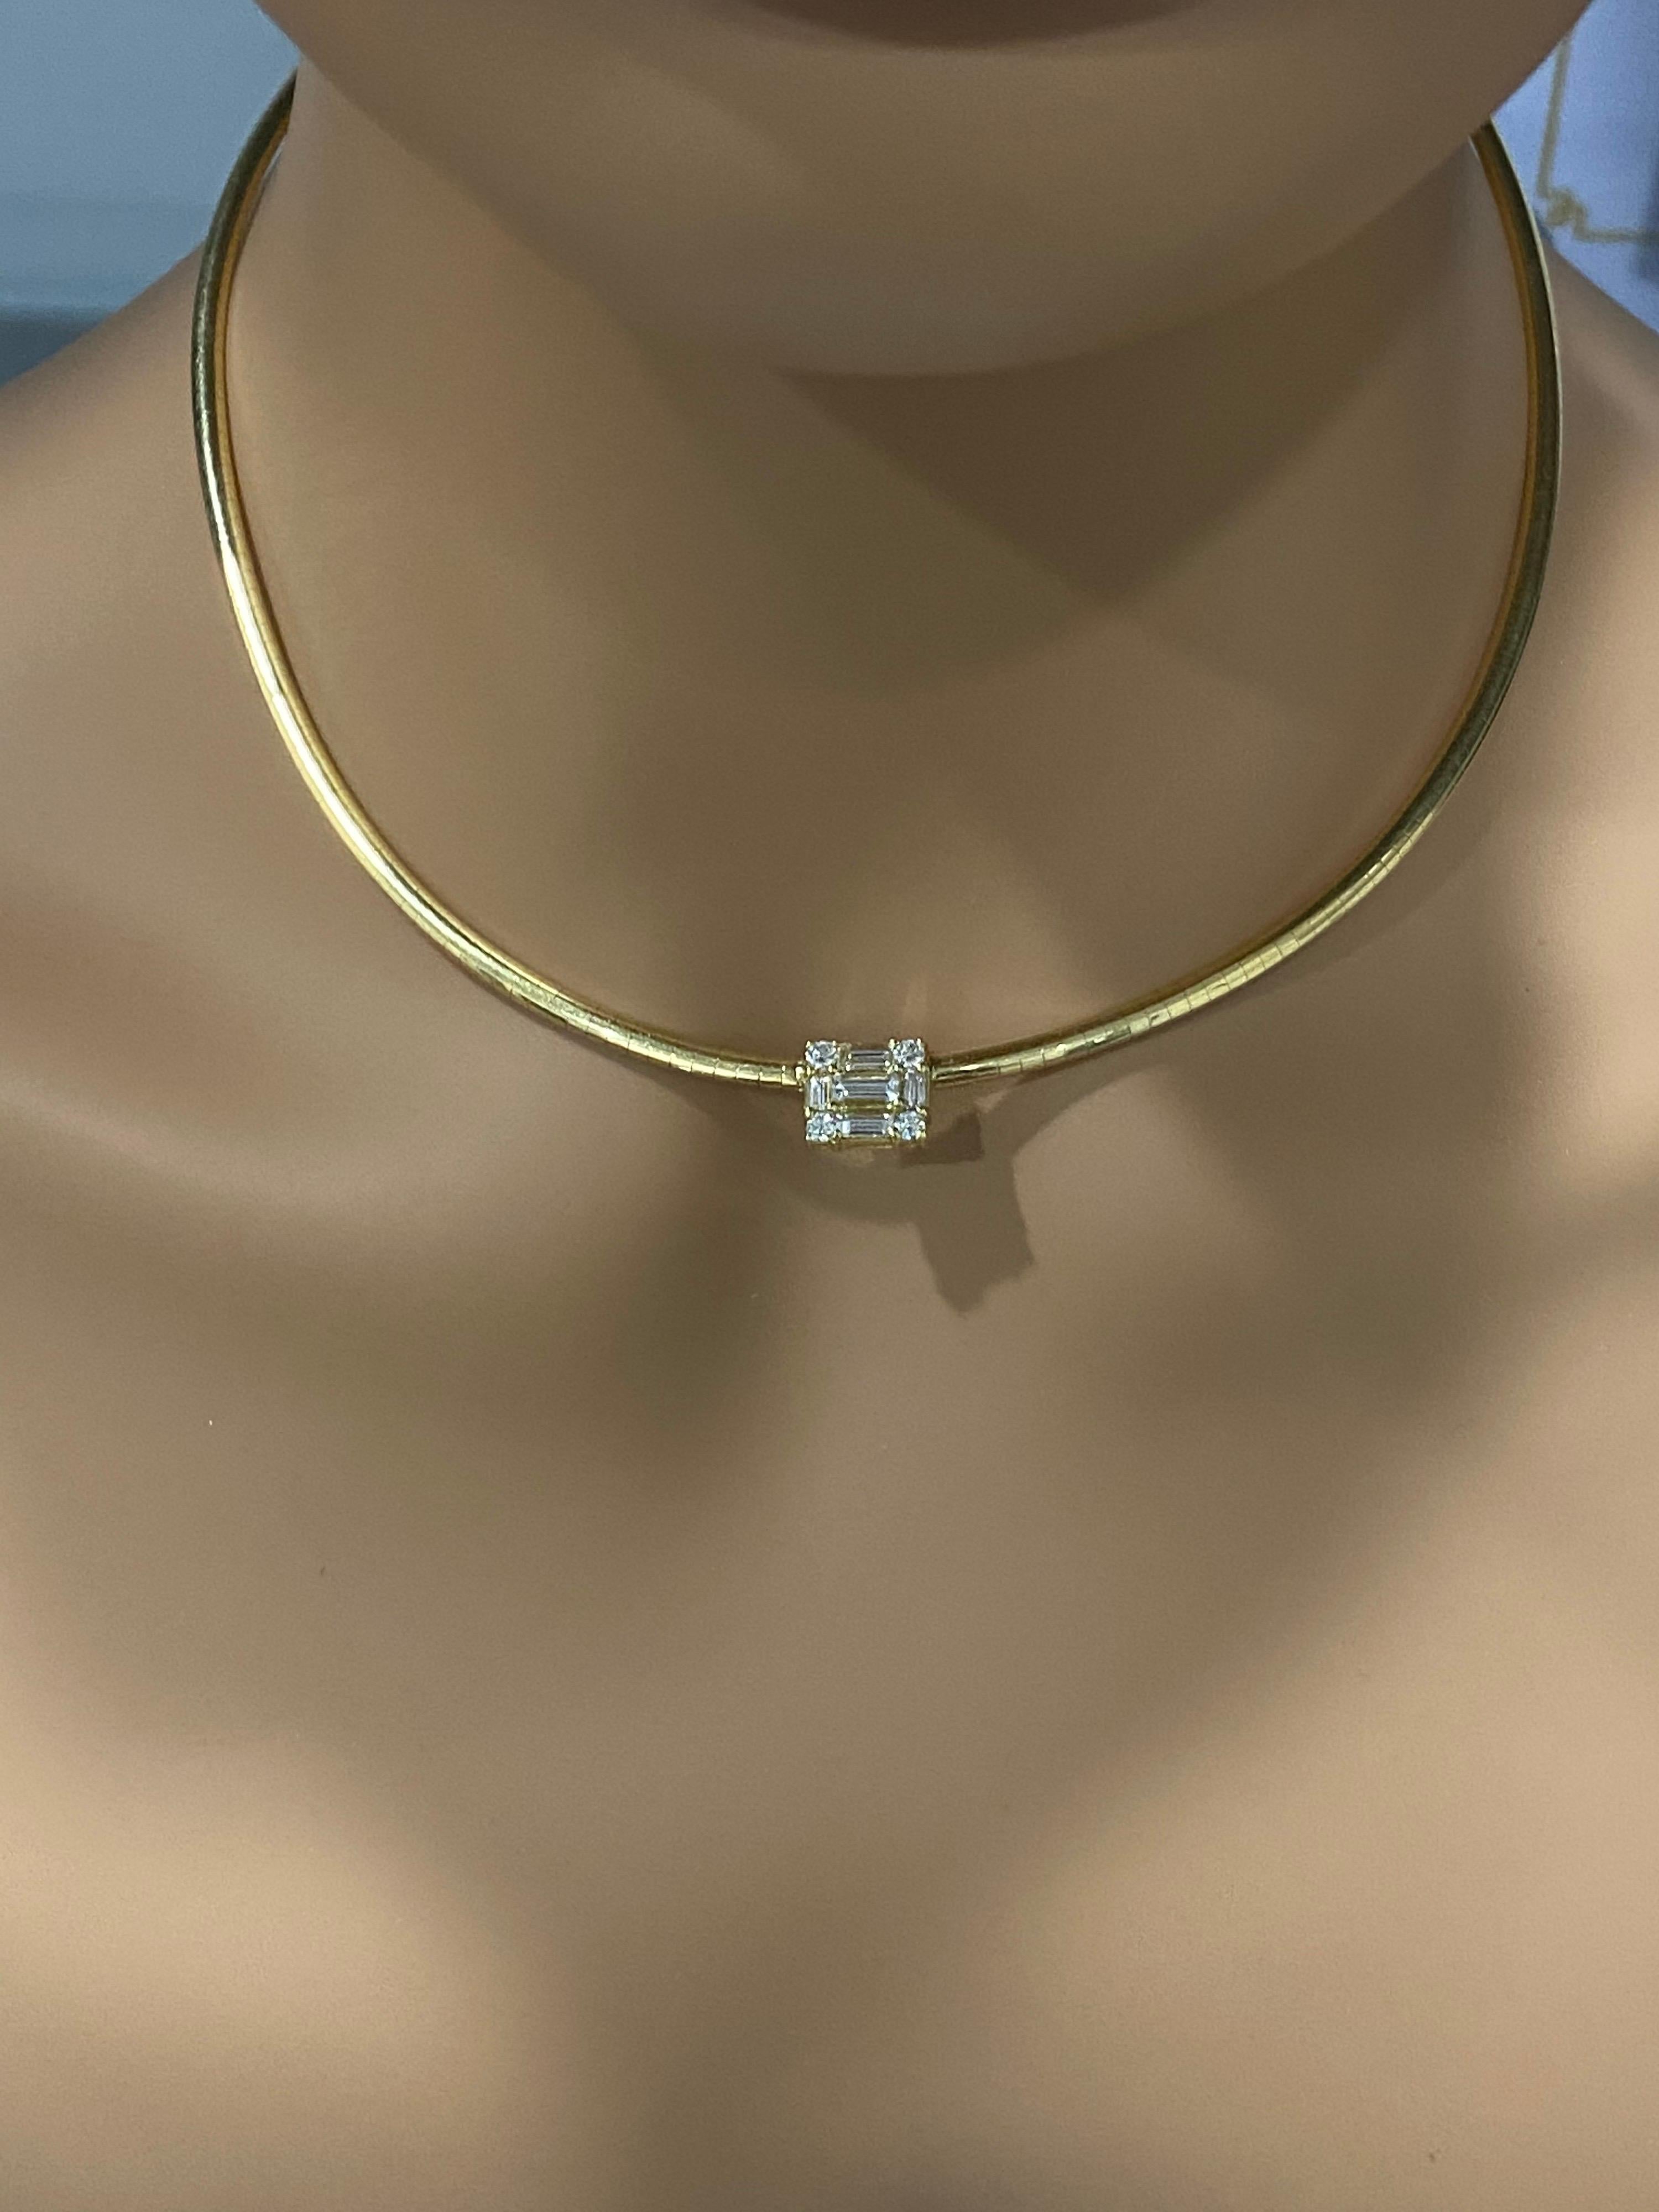 From The MMNY Clarity Collection! One of our best selling necklaces now available on 1st Dibs. 
Sleek, chic and perfect for everyday wear. 
Approx 1.05 CTW. G-H , all VS Range Diamonds. Set in our 18k yellow gold custom omega style necklace. 
This